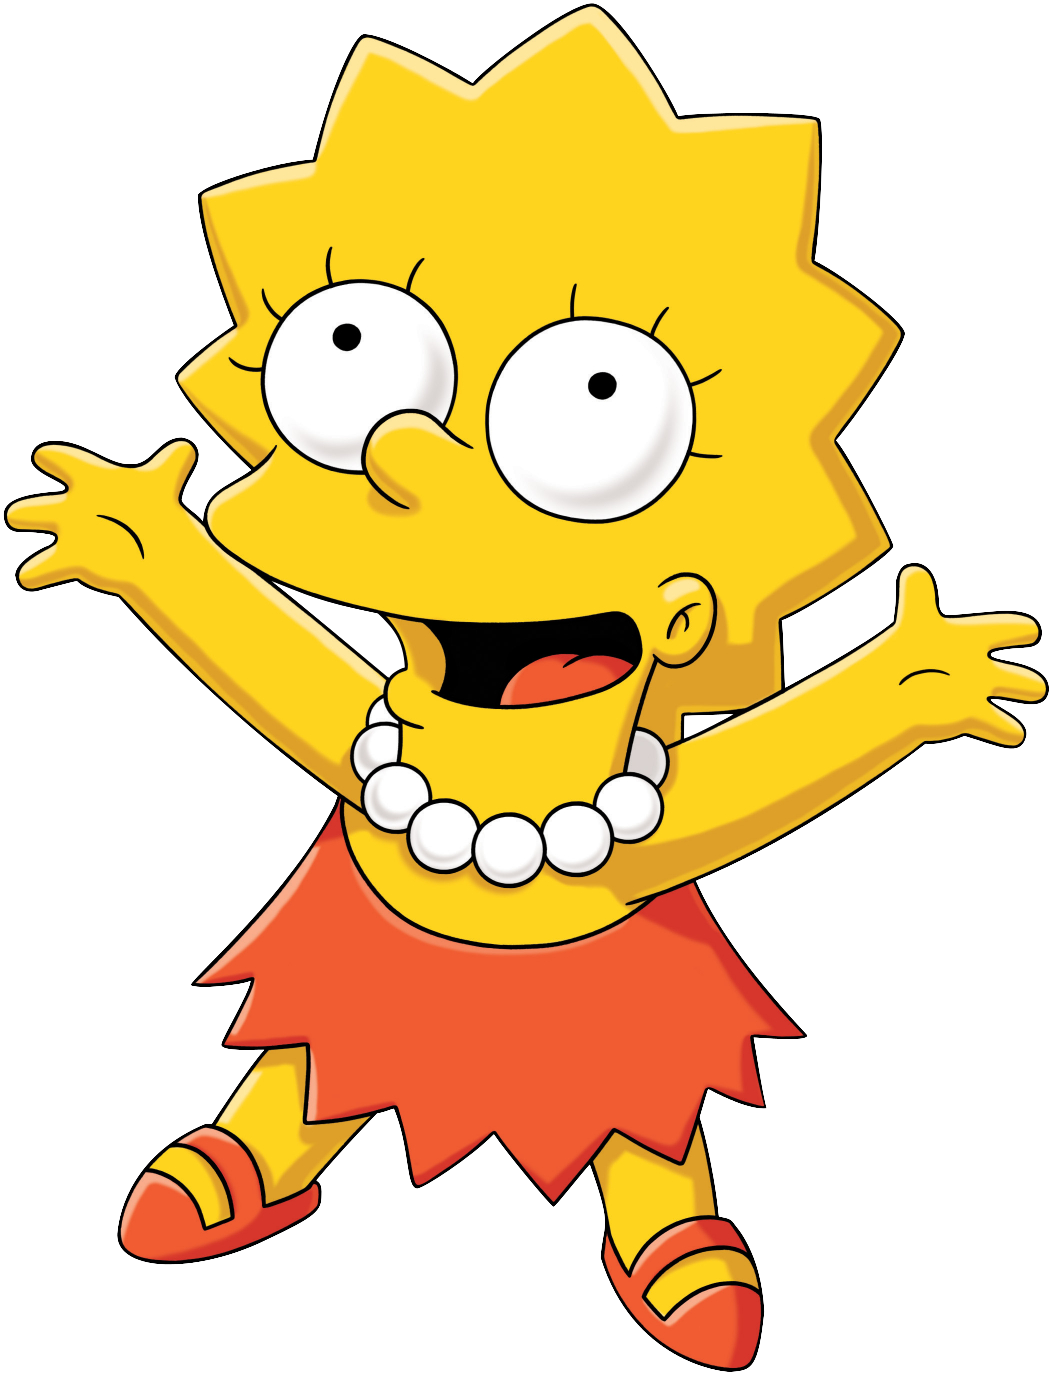 The Simpsons Character PNG HD Image